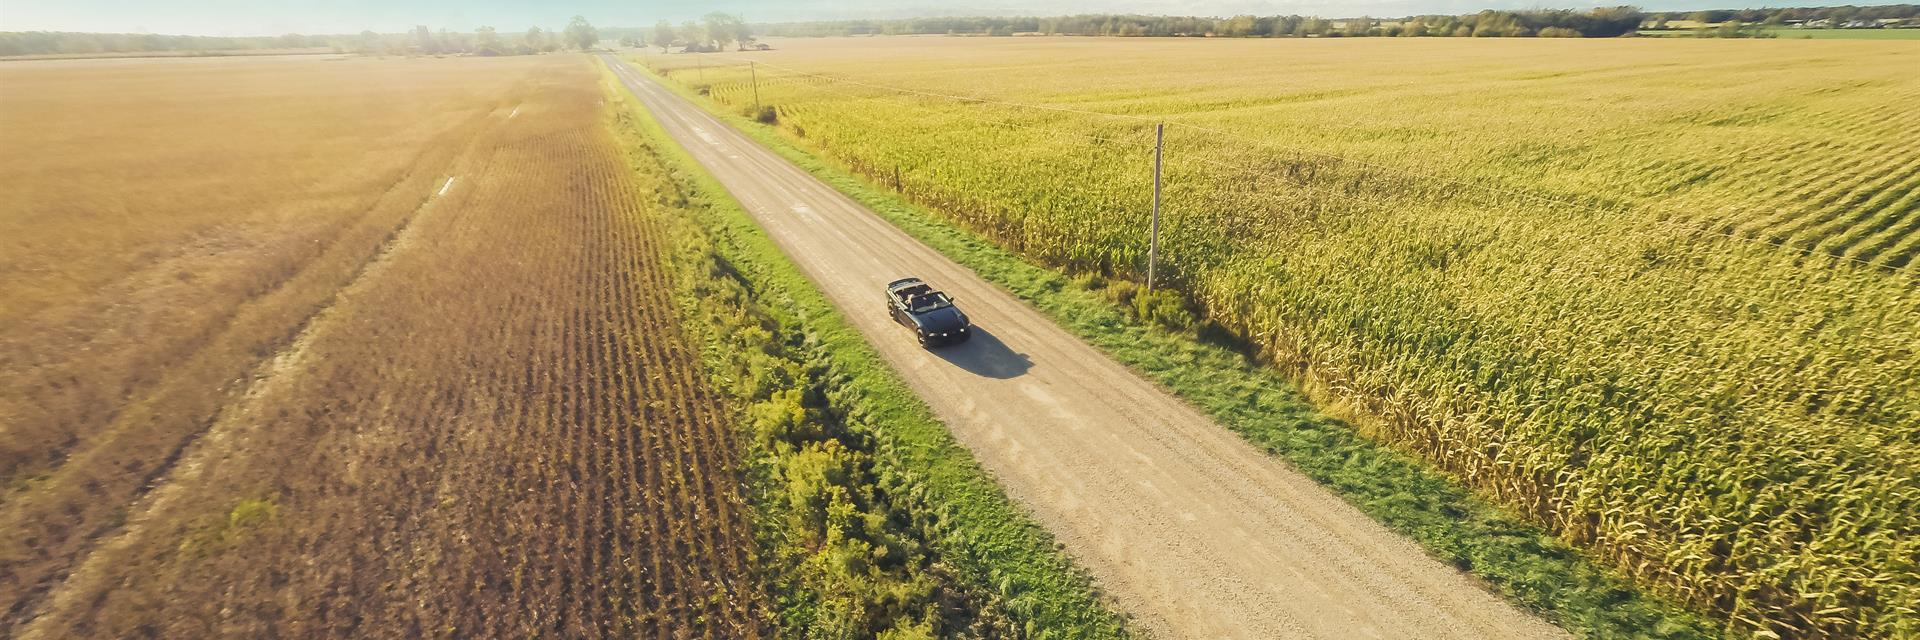 a car driving on a country road in chatham-kent